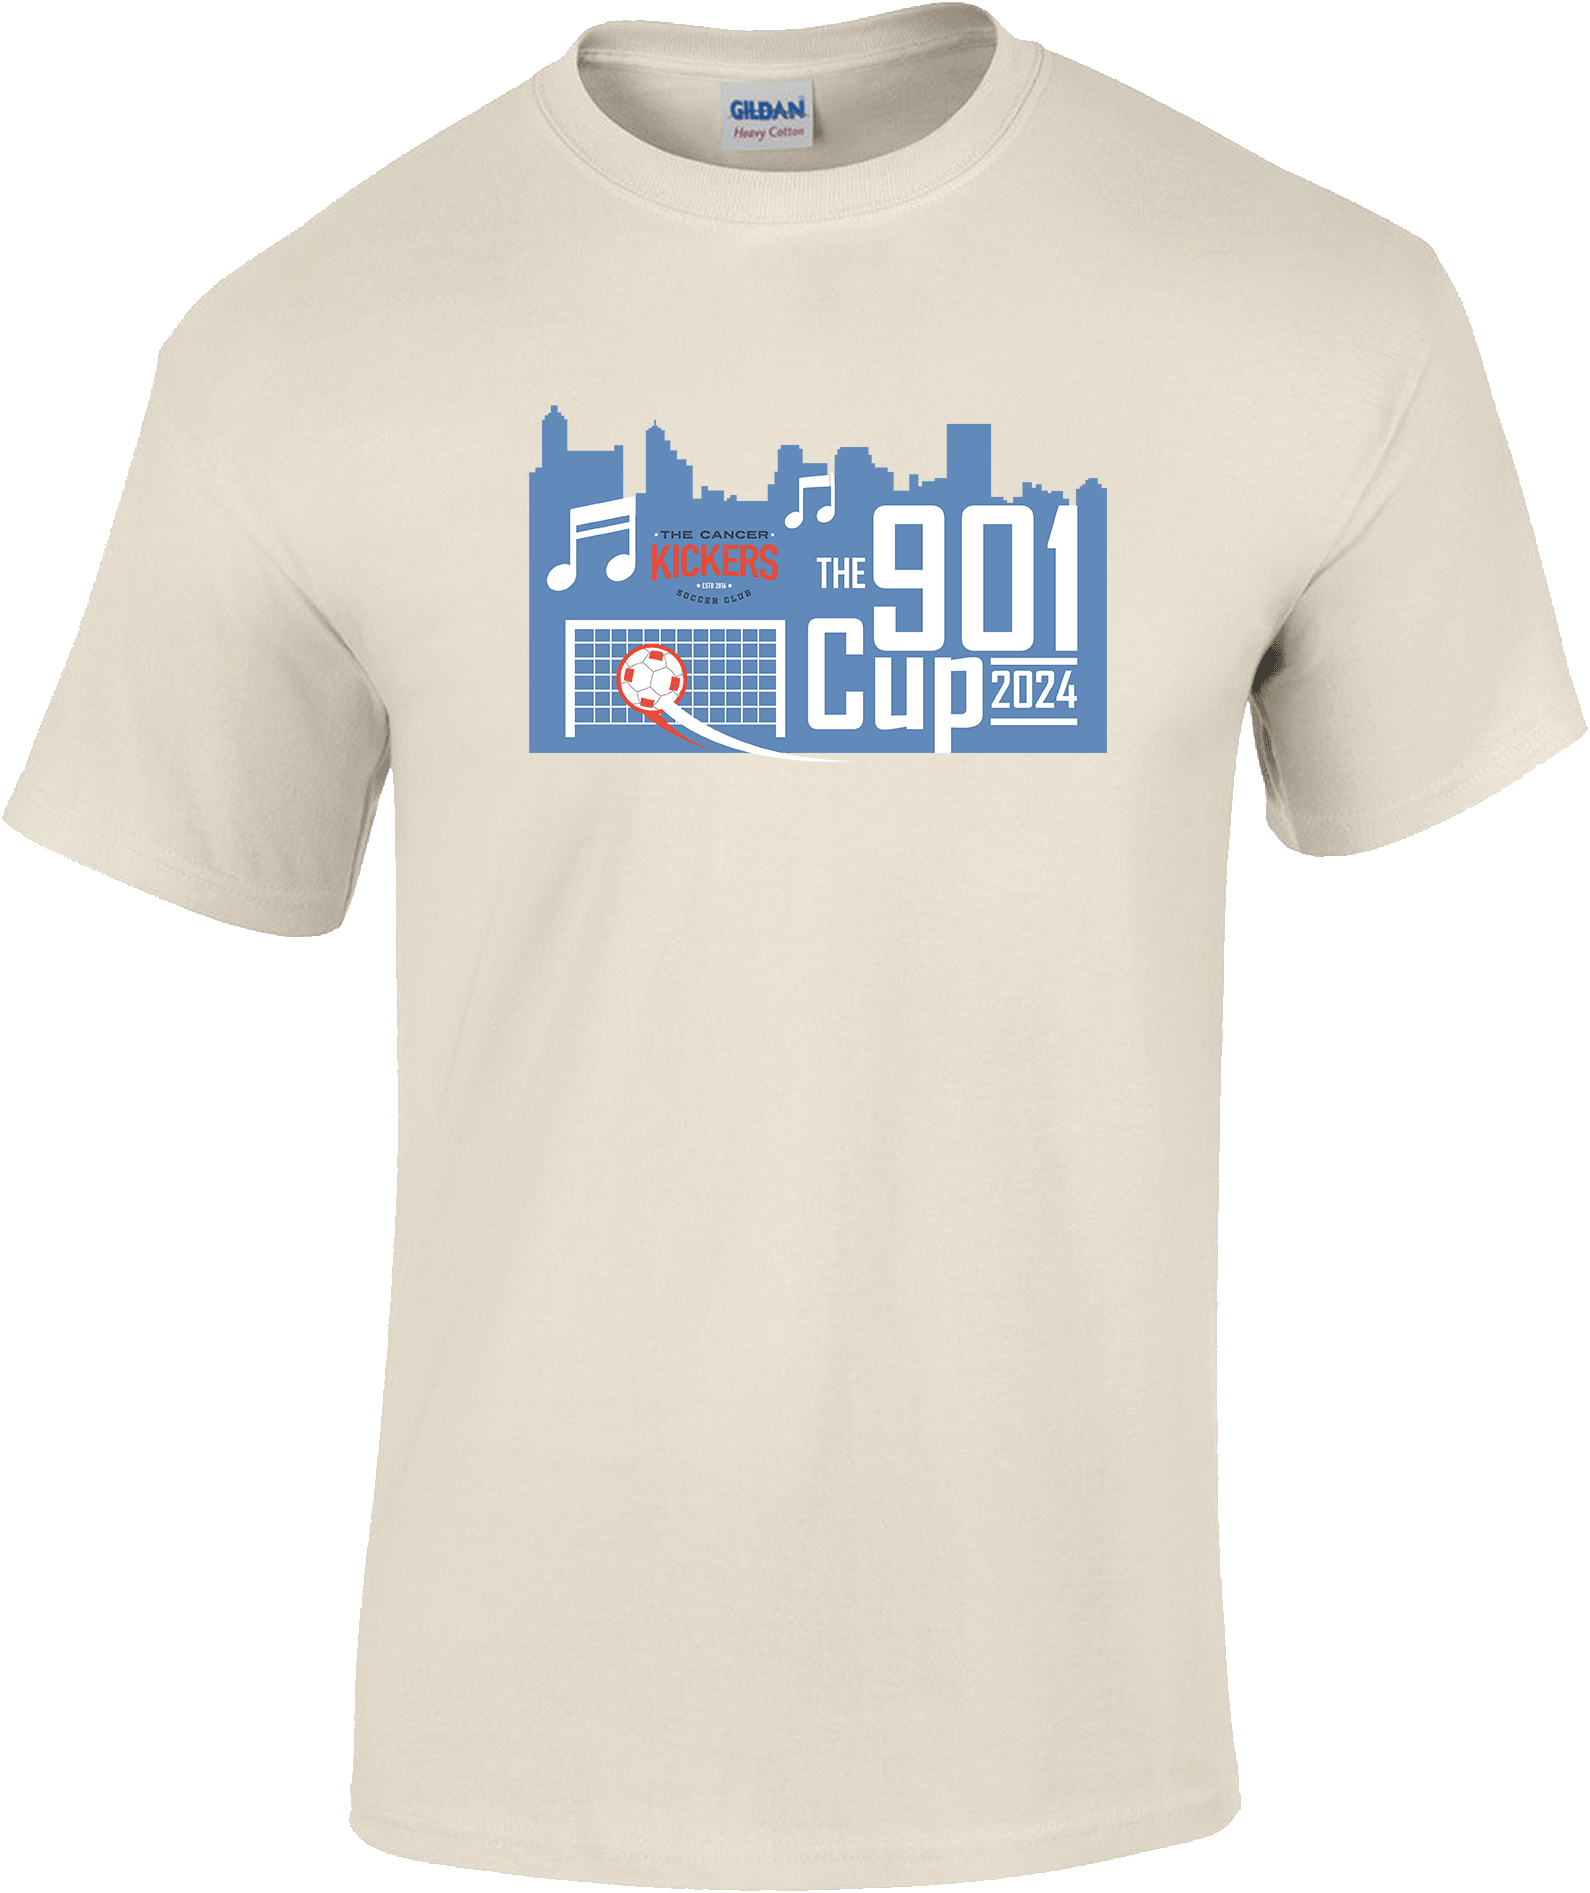 Short Sleeves - 2024 The 901 Cup